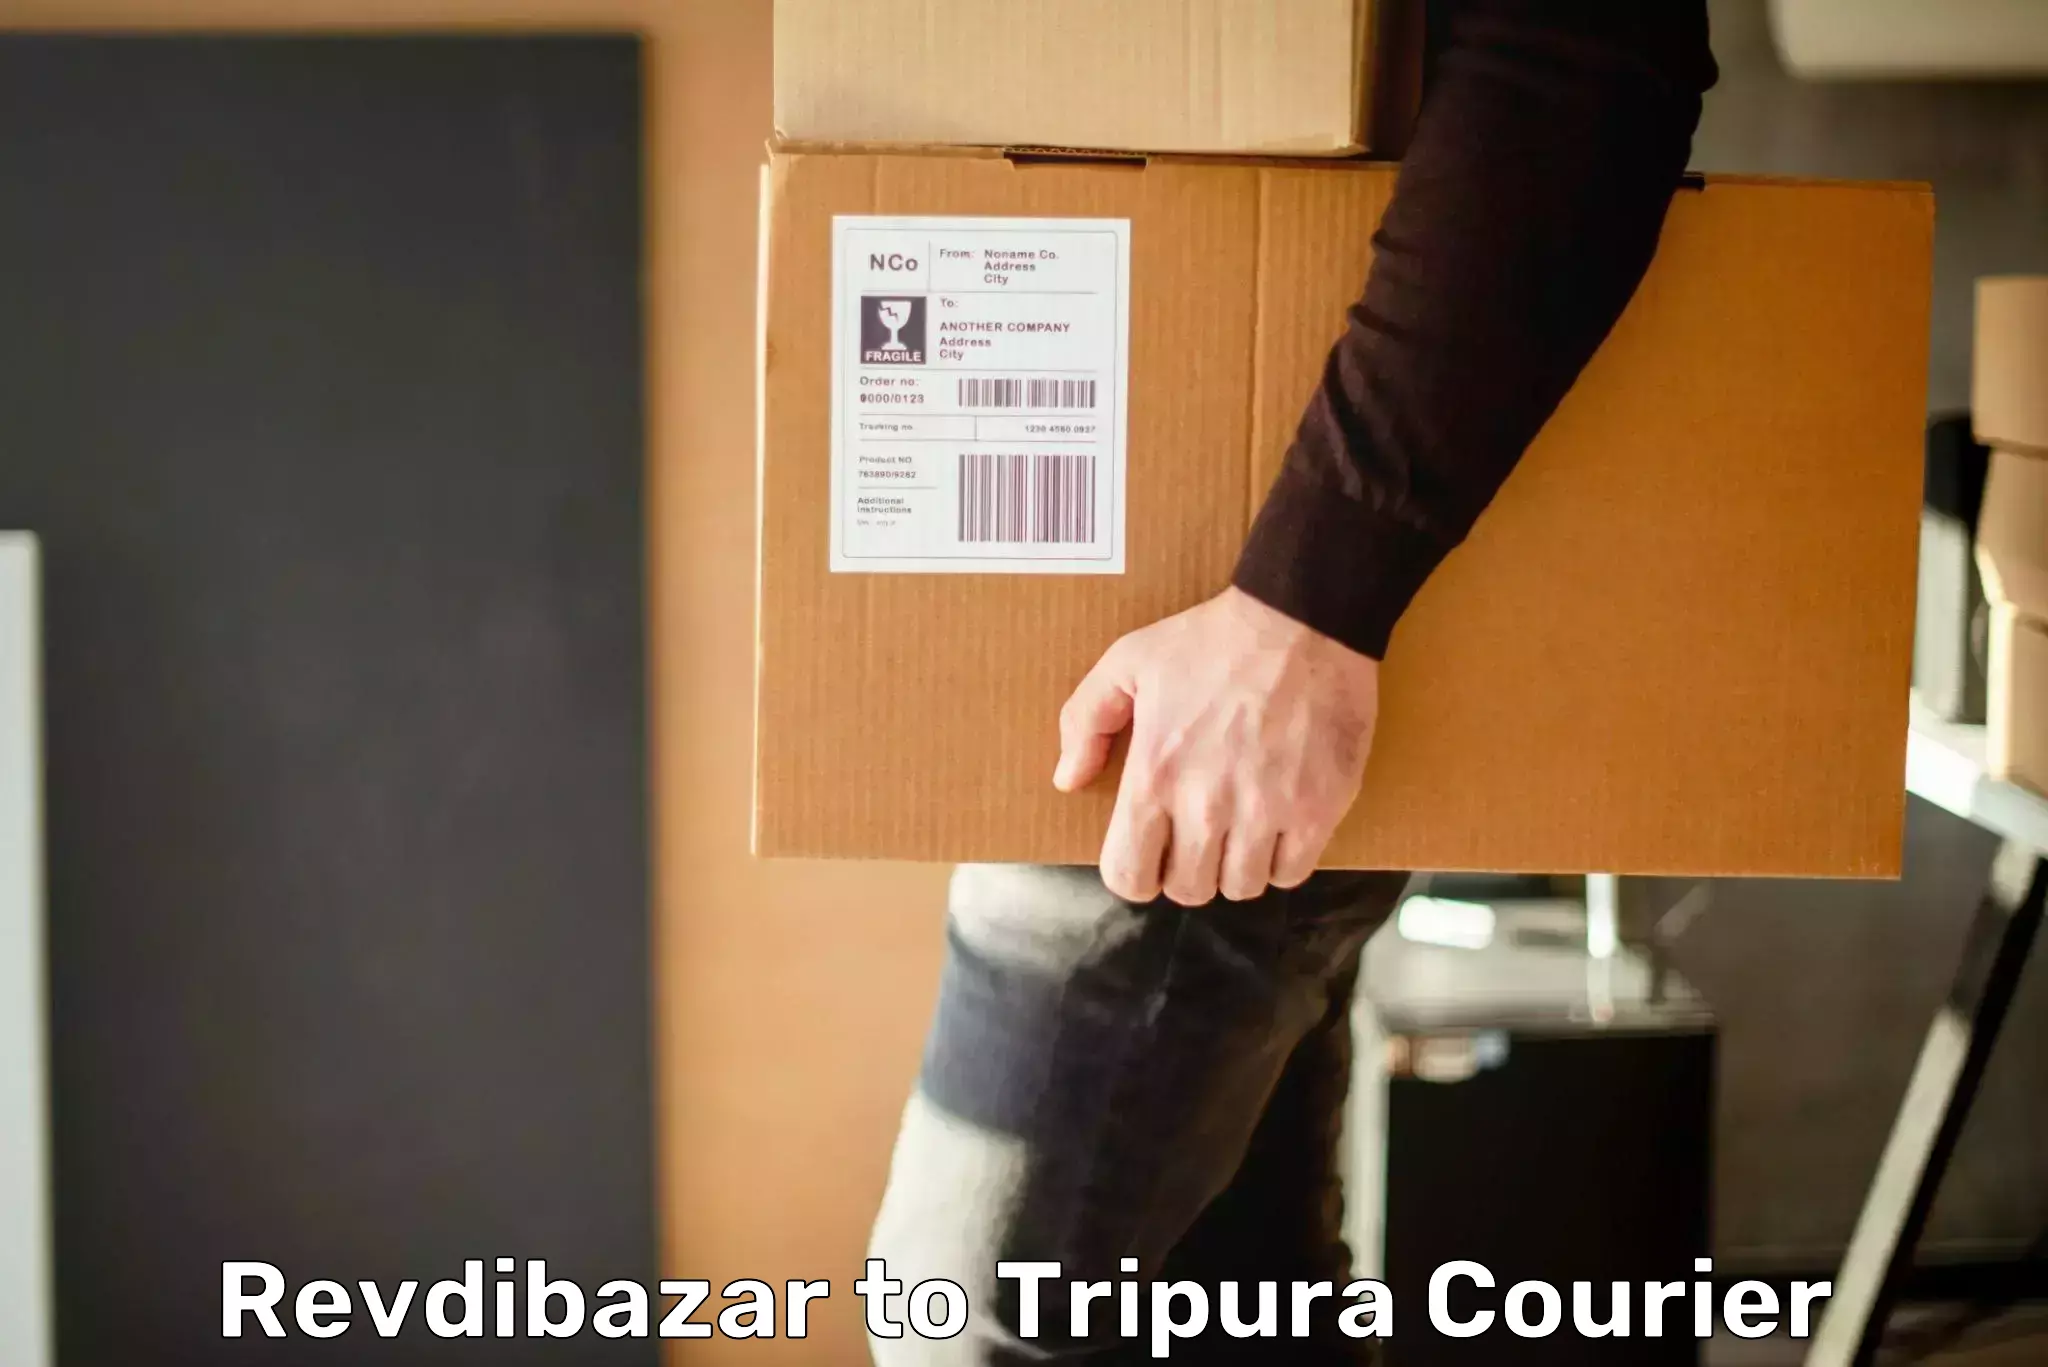 Tailored delivery services Revdibazar to Aambasa